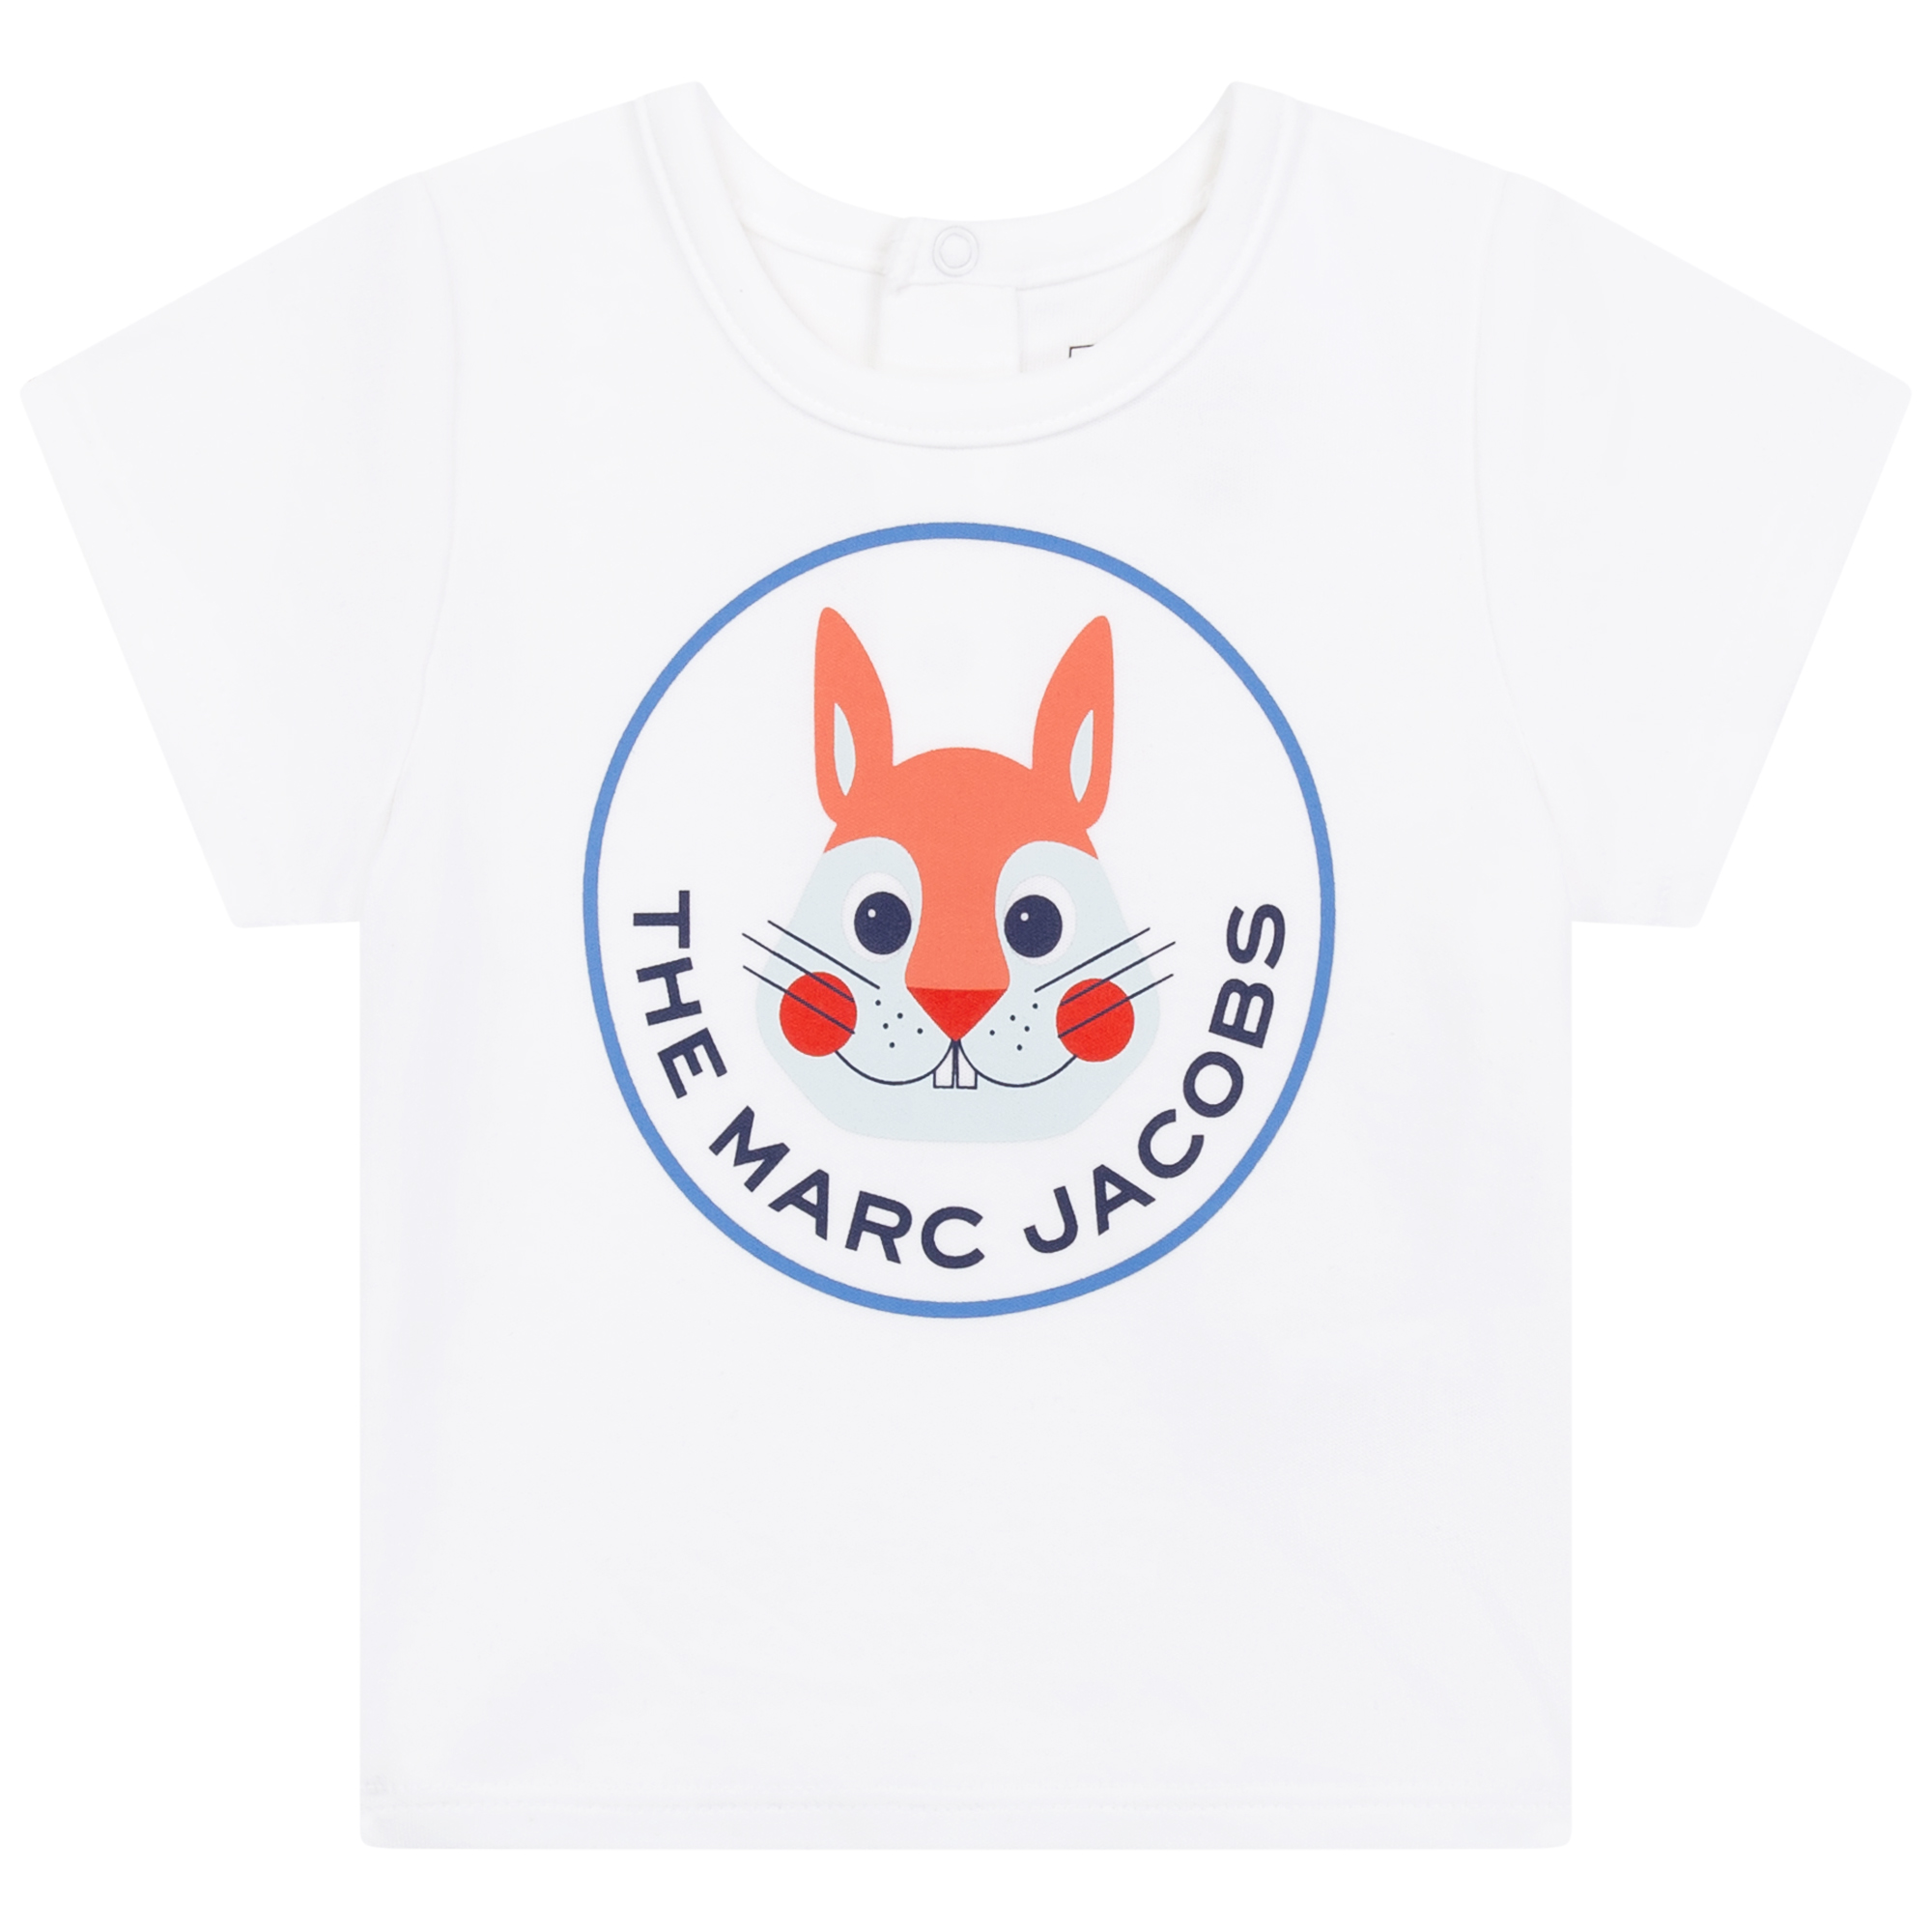 Tracksuit and t-shirt set MARC JACOBS for UNISEX